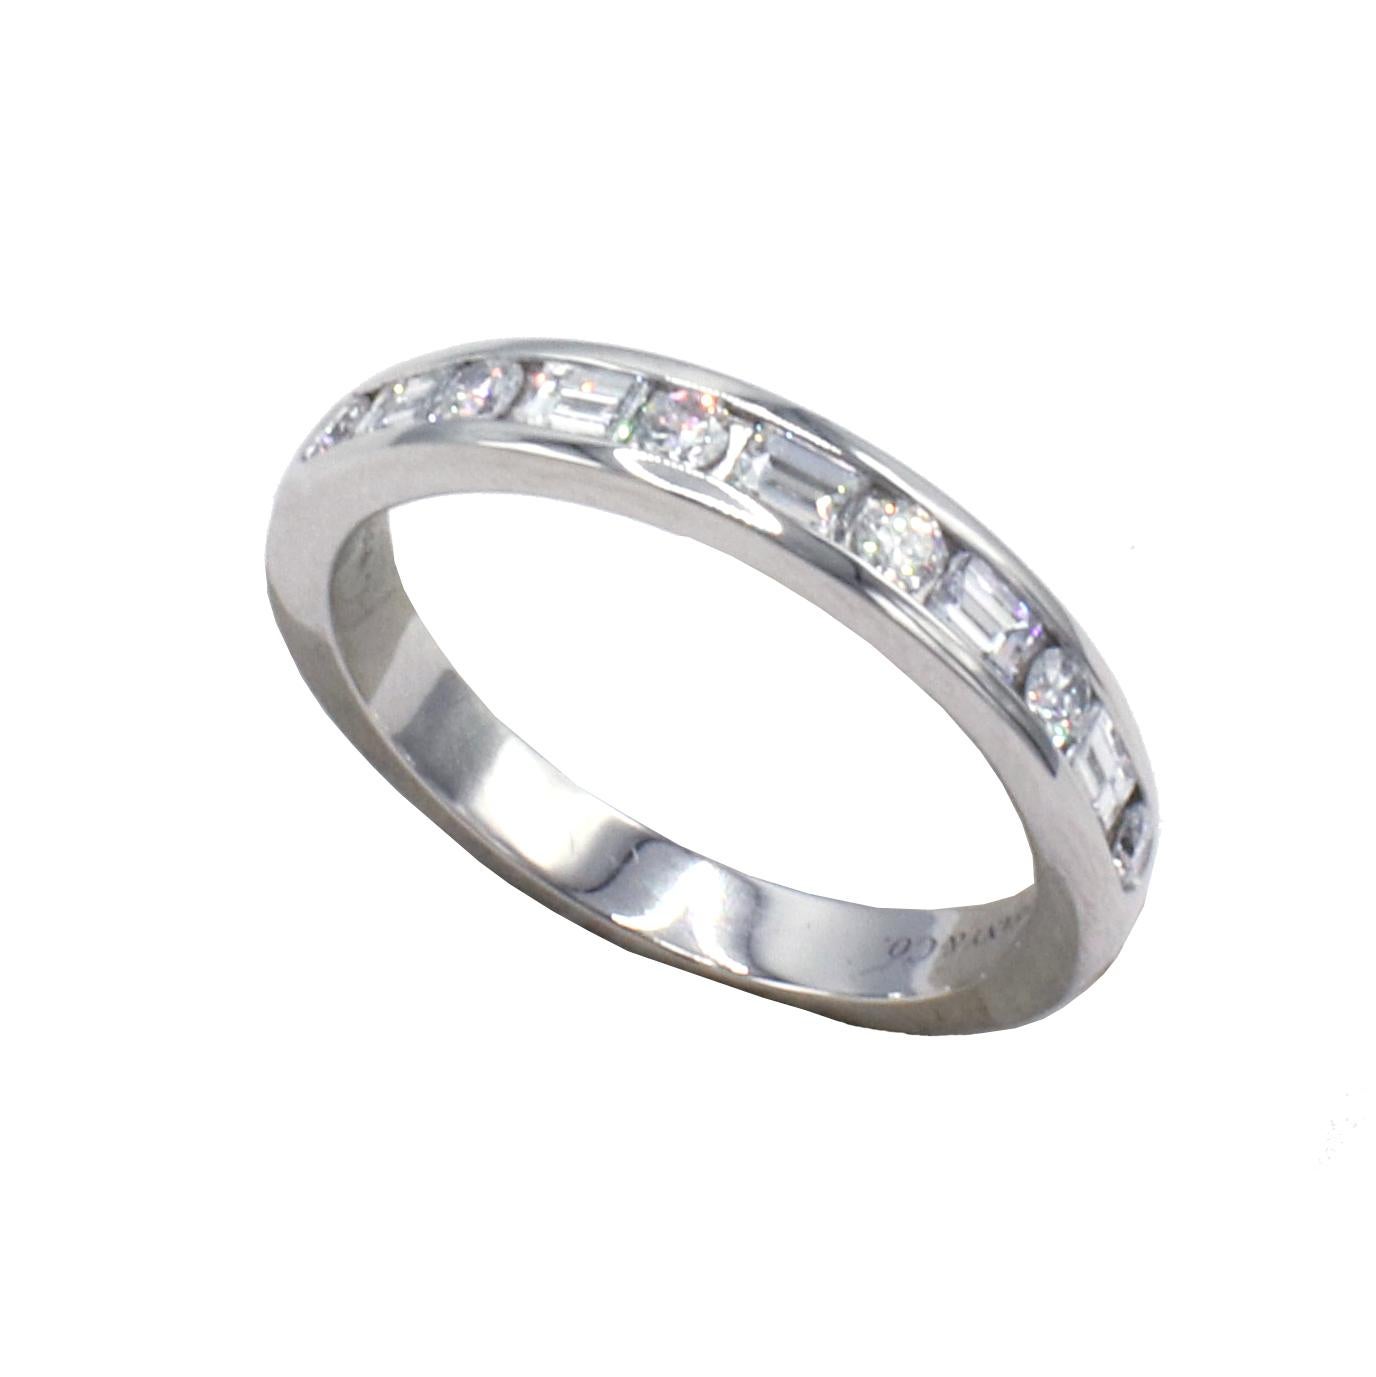 Tiffany & Co. Platinum Round and Baguette Natural Diamond Wedding Band Ring 
Metal: Platinum, PT950
Weight: 6.12 grams
Diamonds: Approx. .65 CTW round and baguette F-G VS natural diamonds 
Size: 8 (US)
Width: 3.5mm
Retail $4,100 USD

